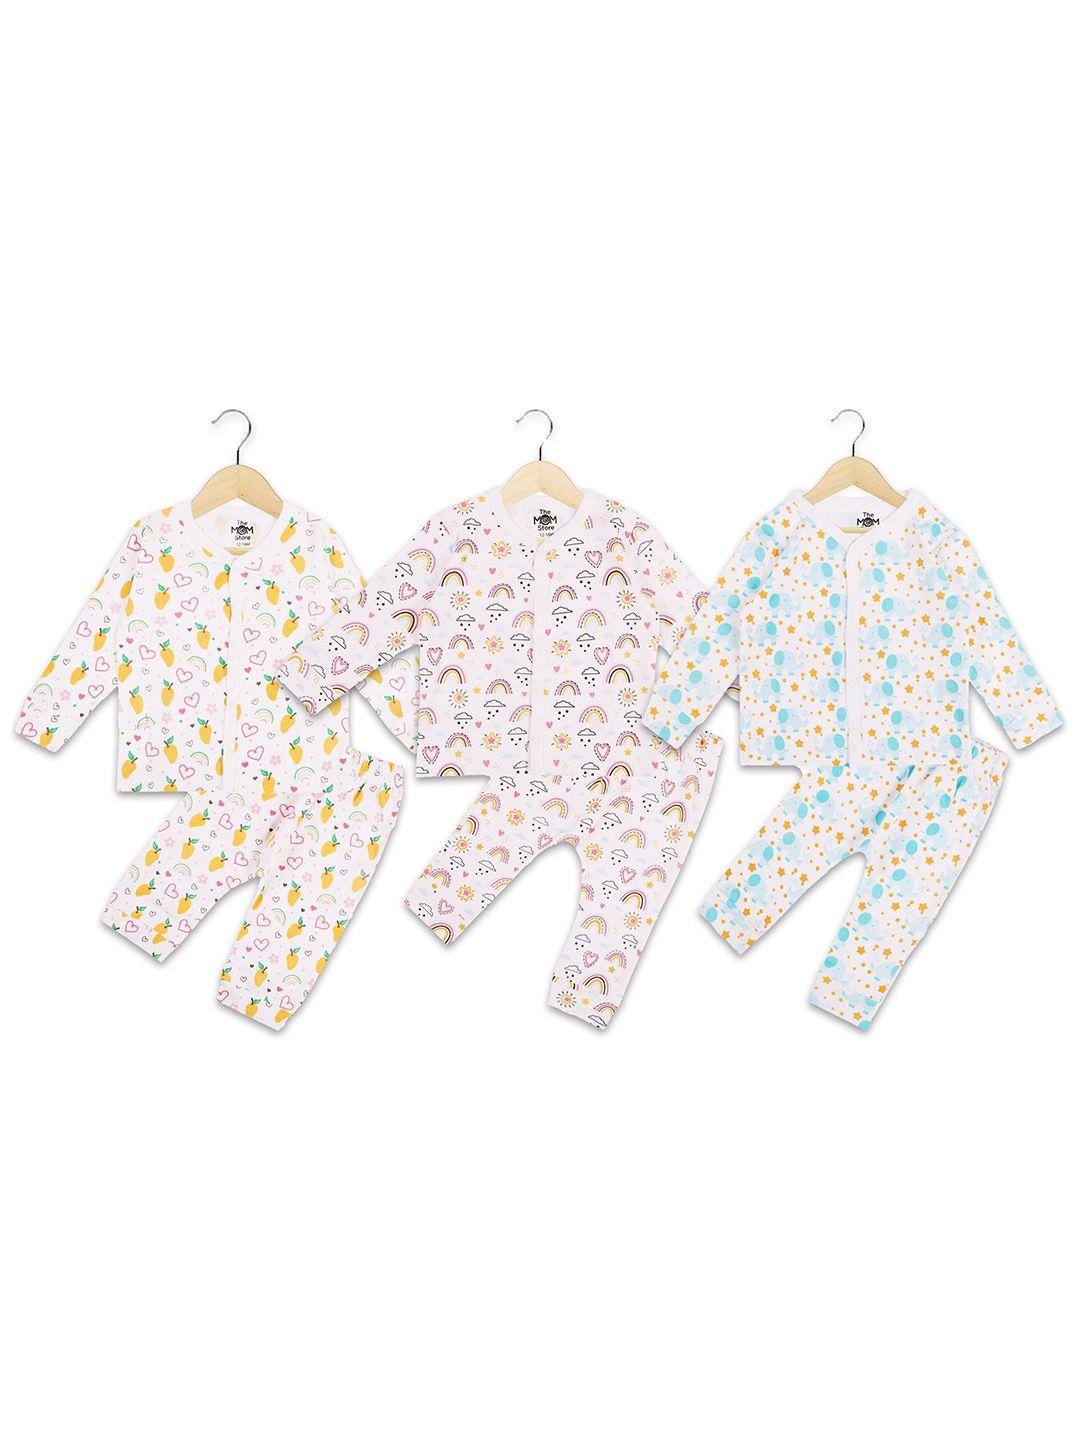 the mom store kids white & blue set of 3 printed cotton clothing set